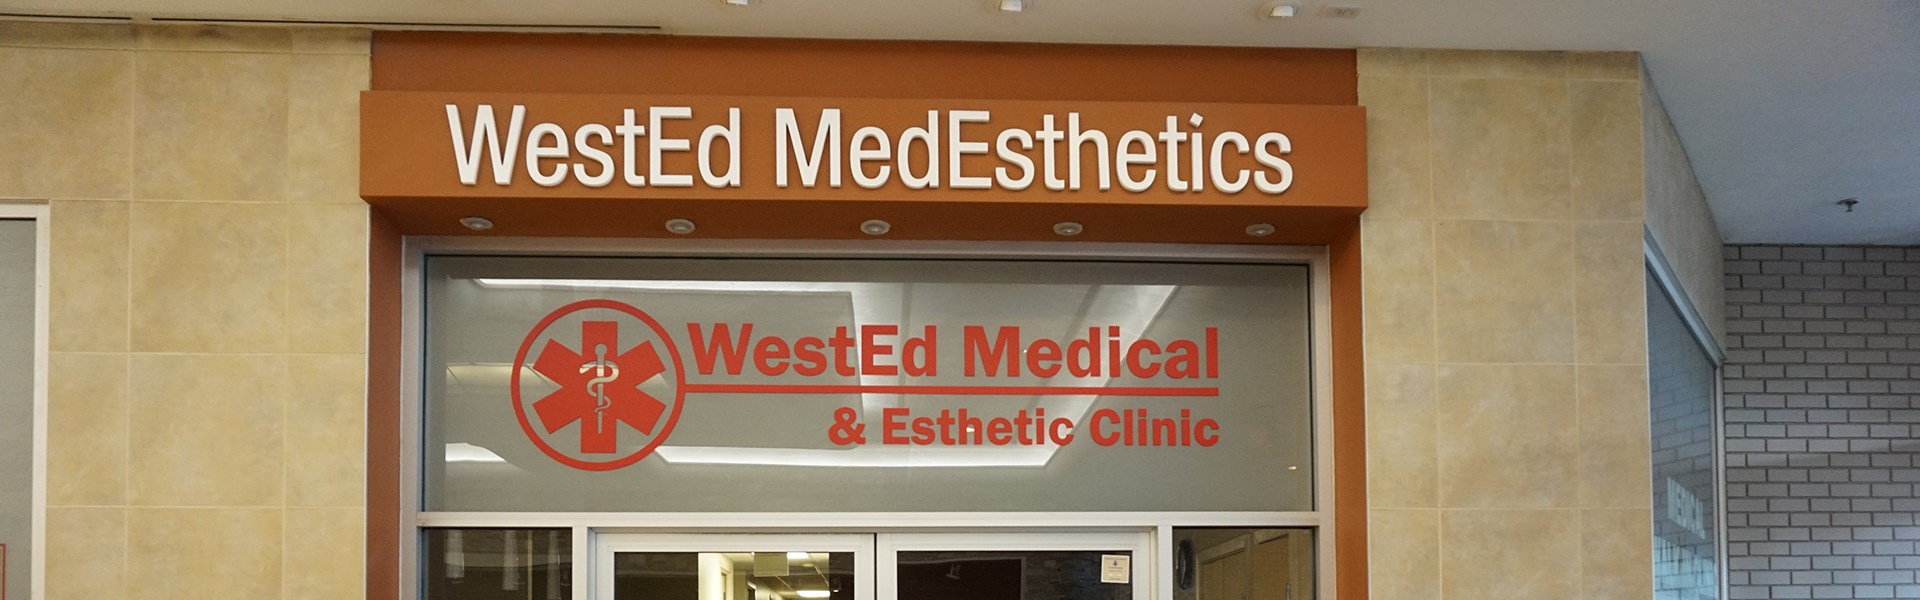 WestEd Medical & Esthetic Clinic